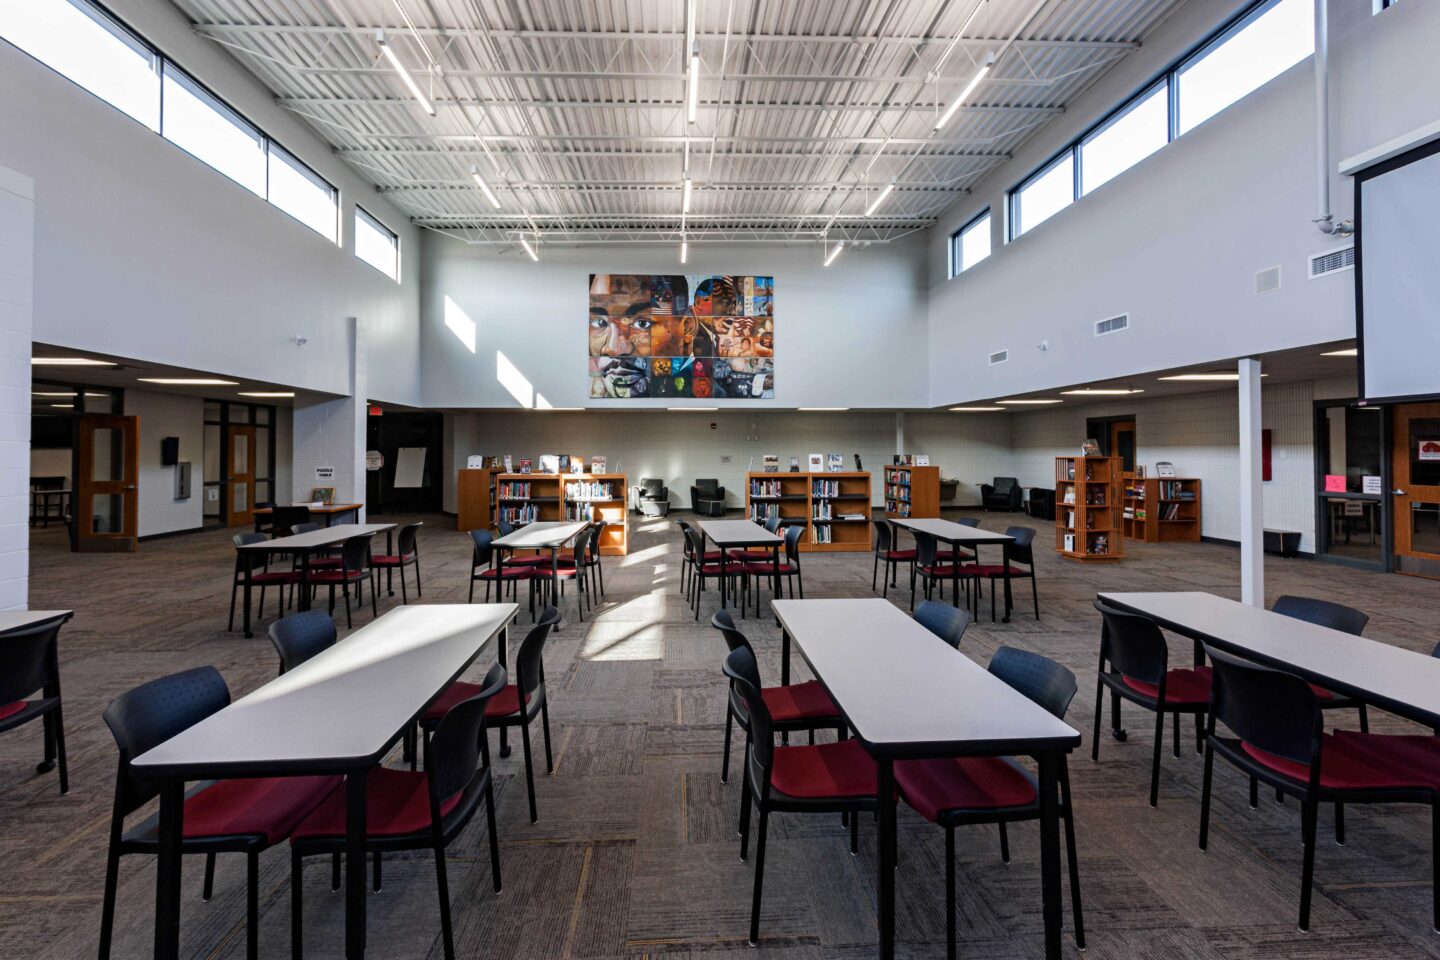 Rows of tables in the renovated library with a colorful mural of Martin Luther King Jr. in the background